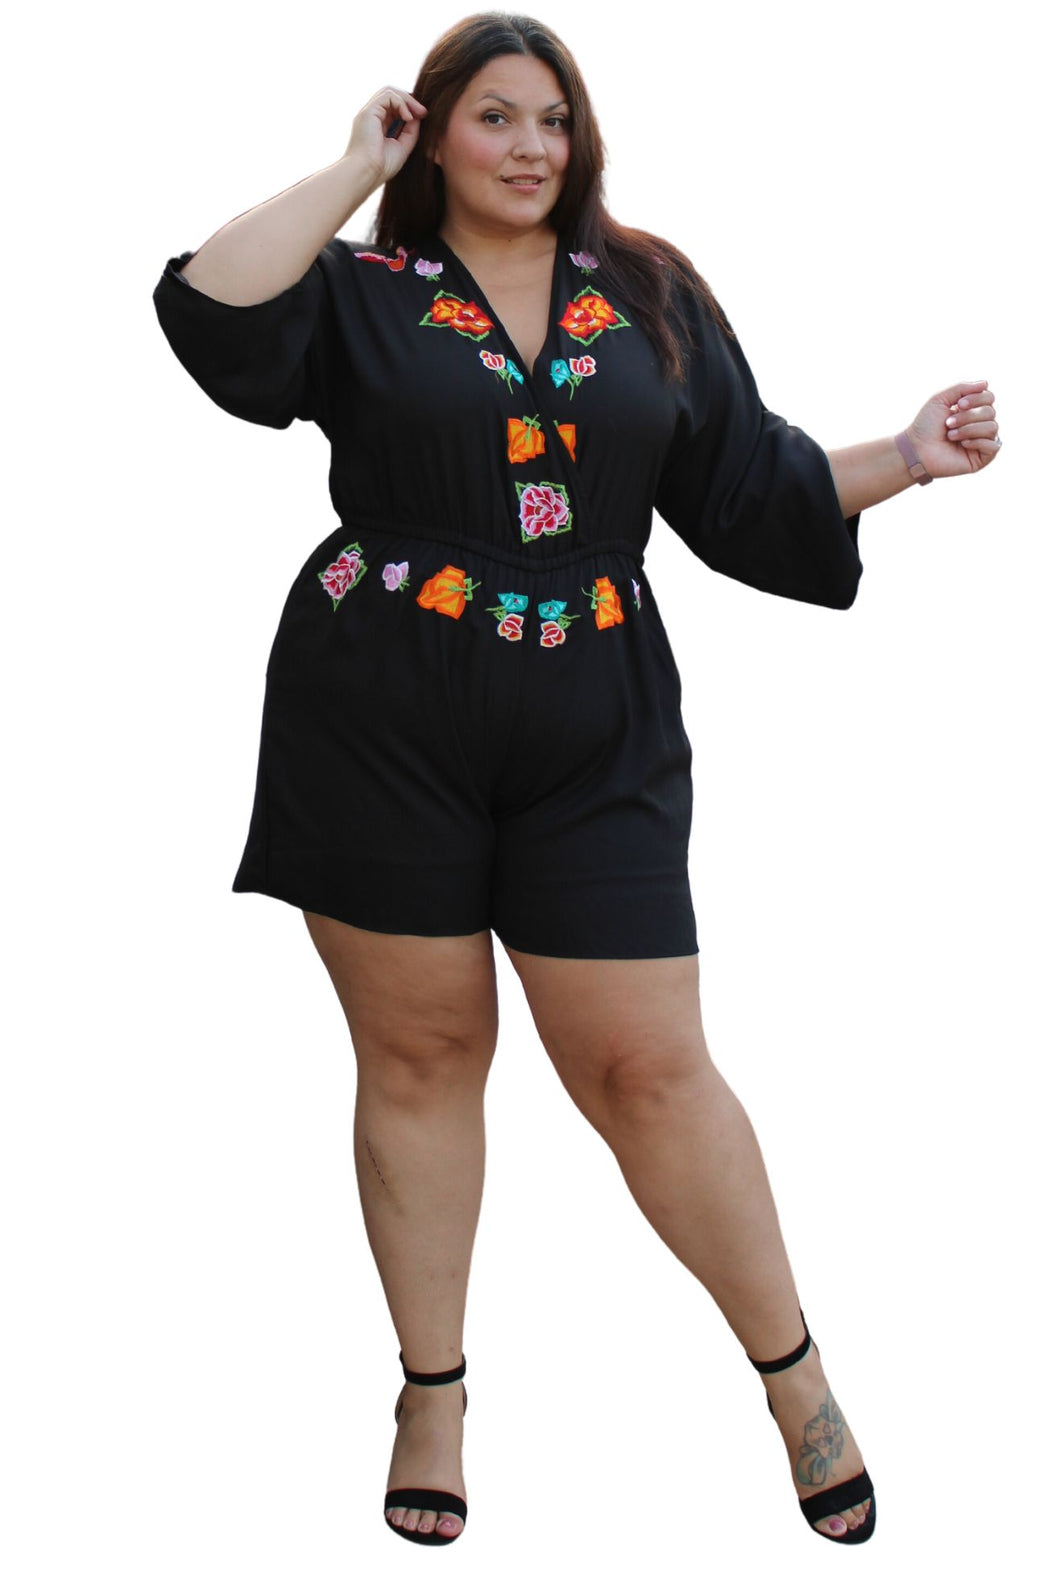 Desigual Black & Rainbow Embroidered Floral Romper, Size XL